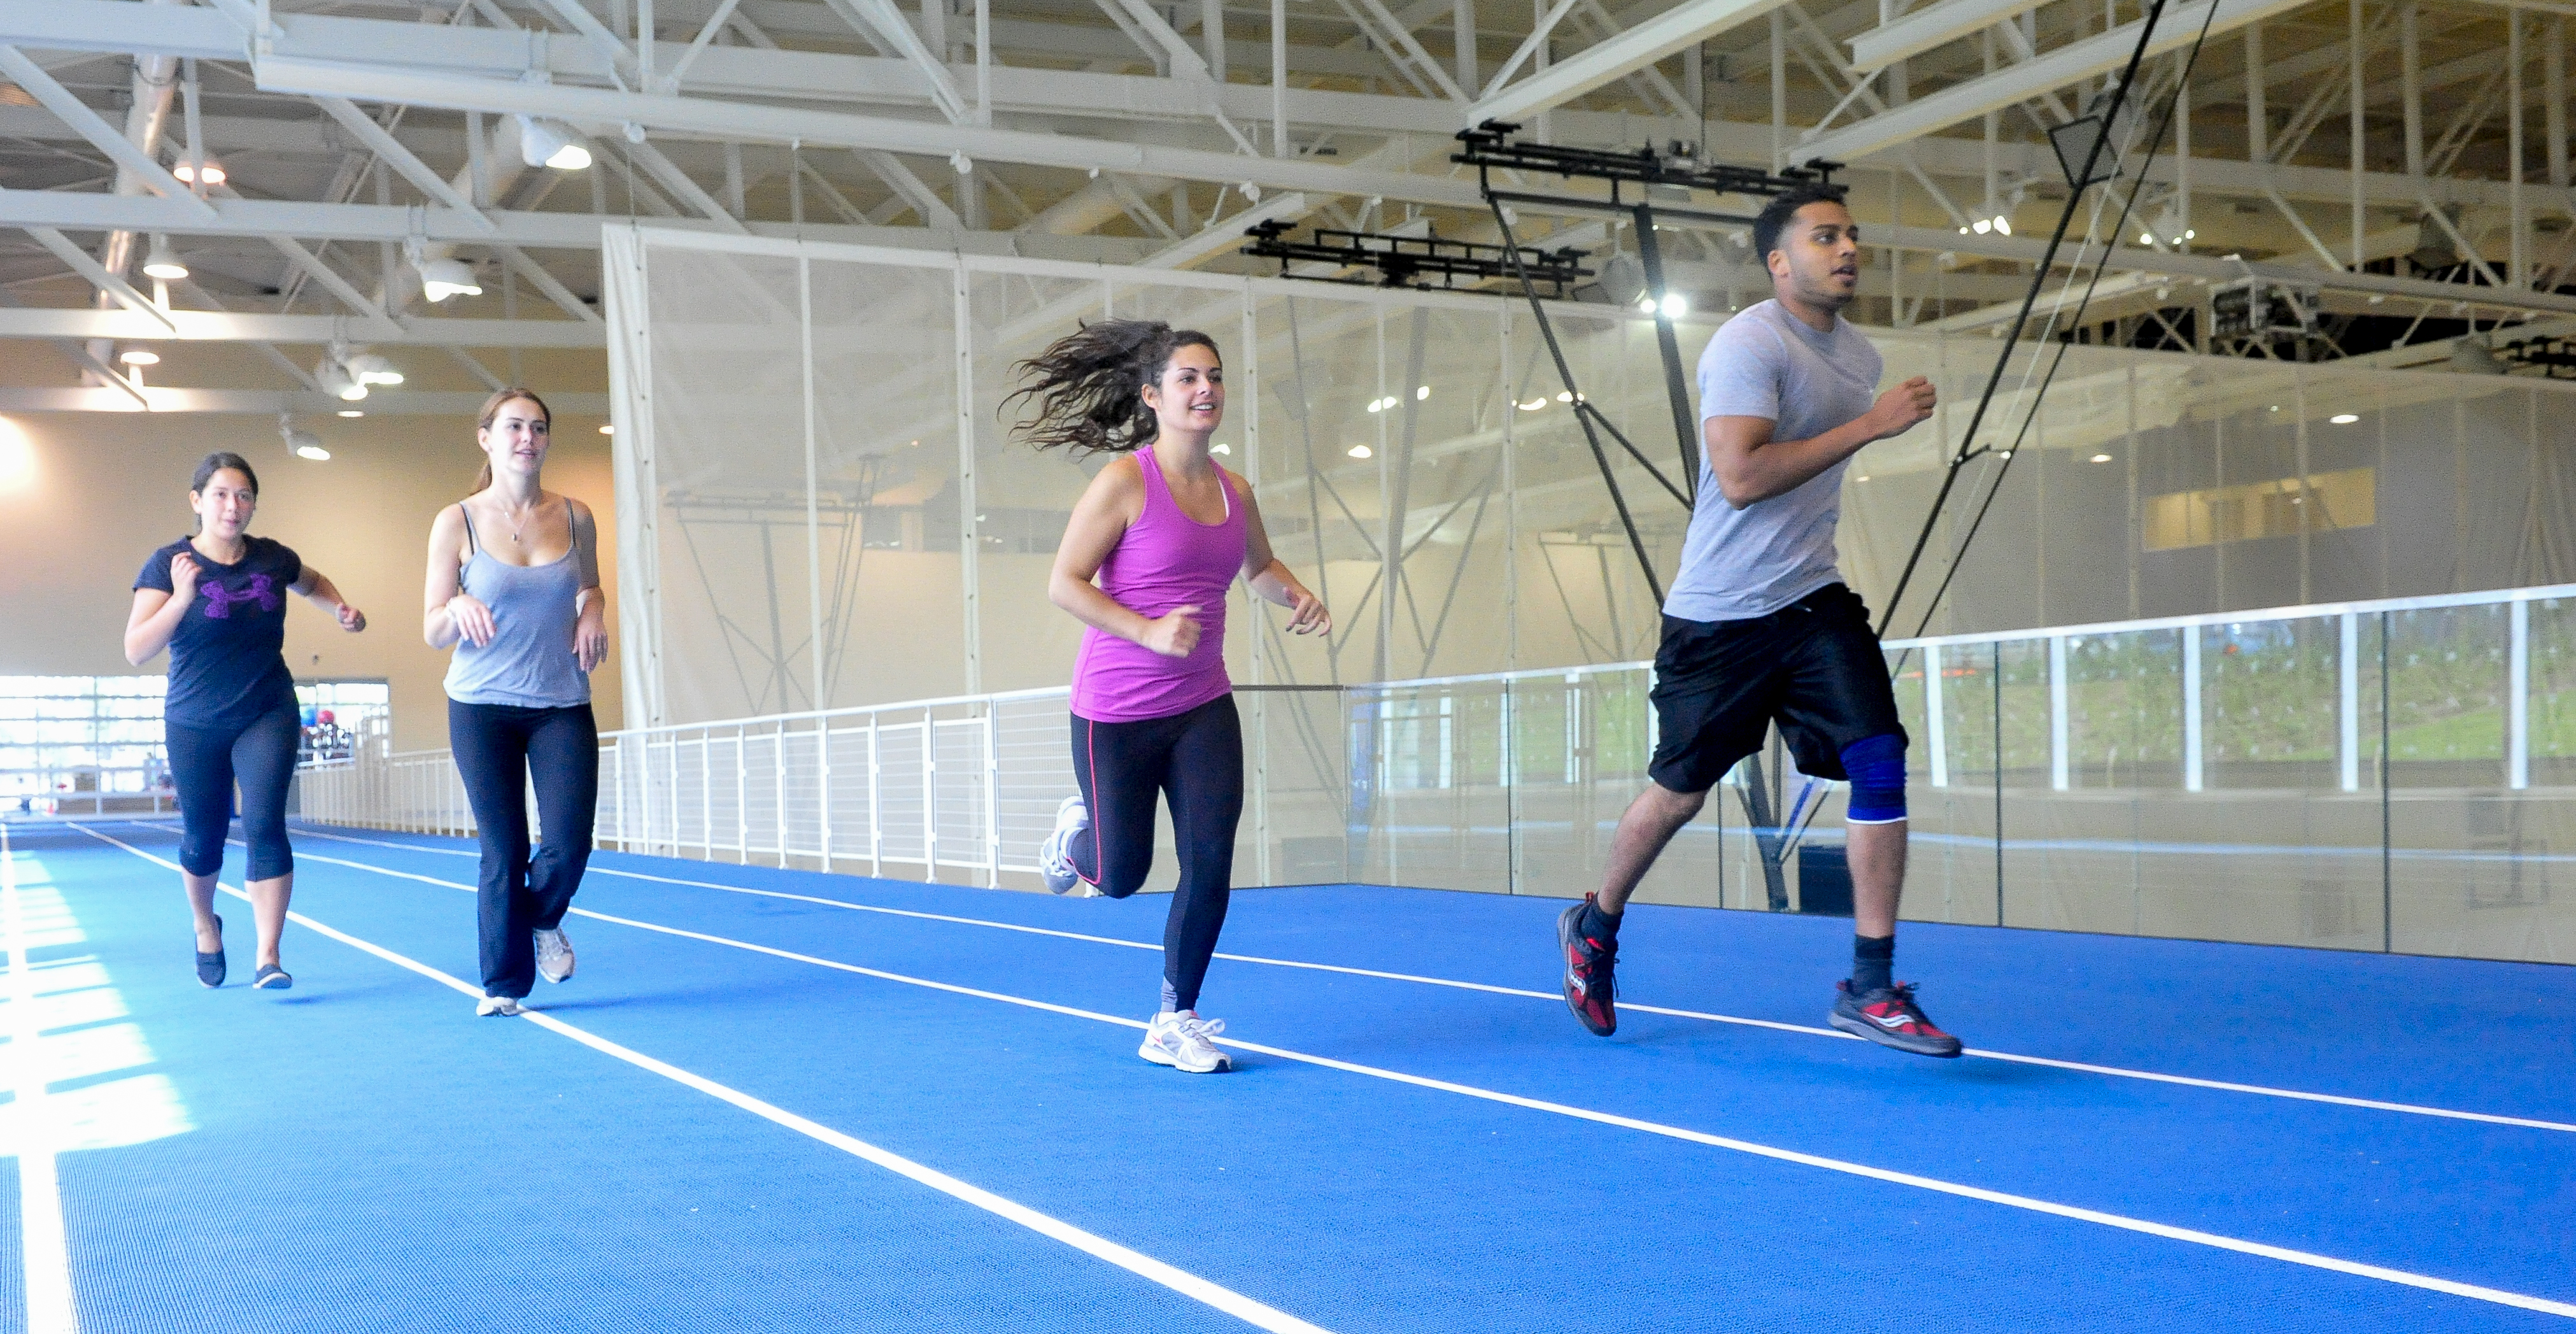 Students running on track in Toronto Pan Am Sports Centre.